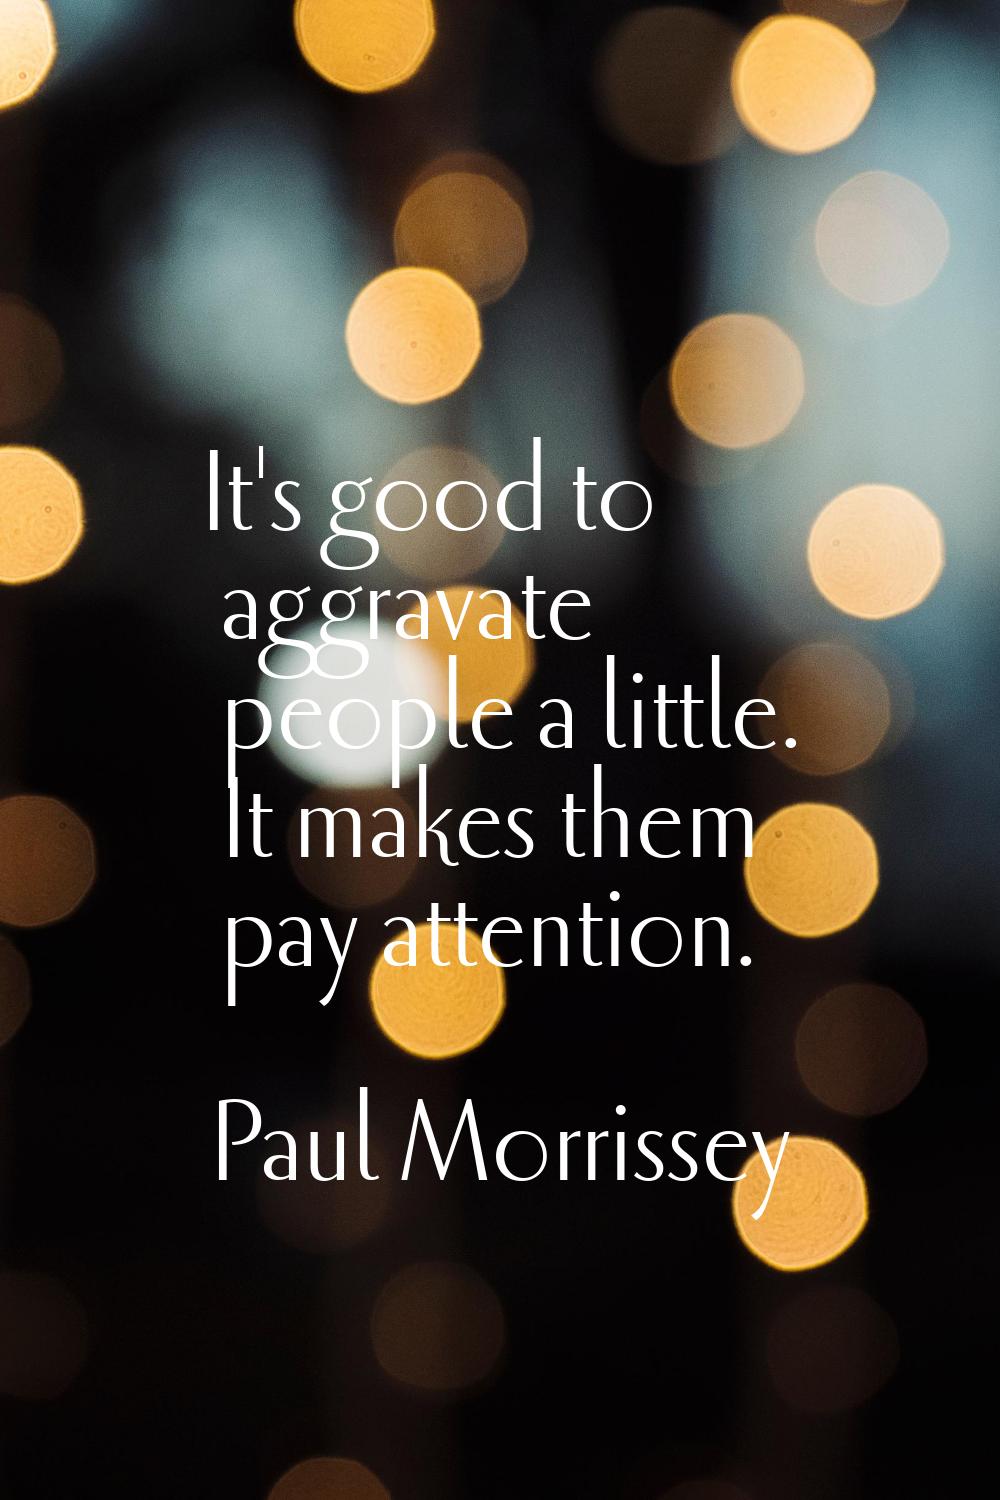 It's good to aggravate people a little. It makes them pay attention.